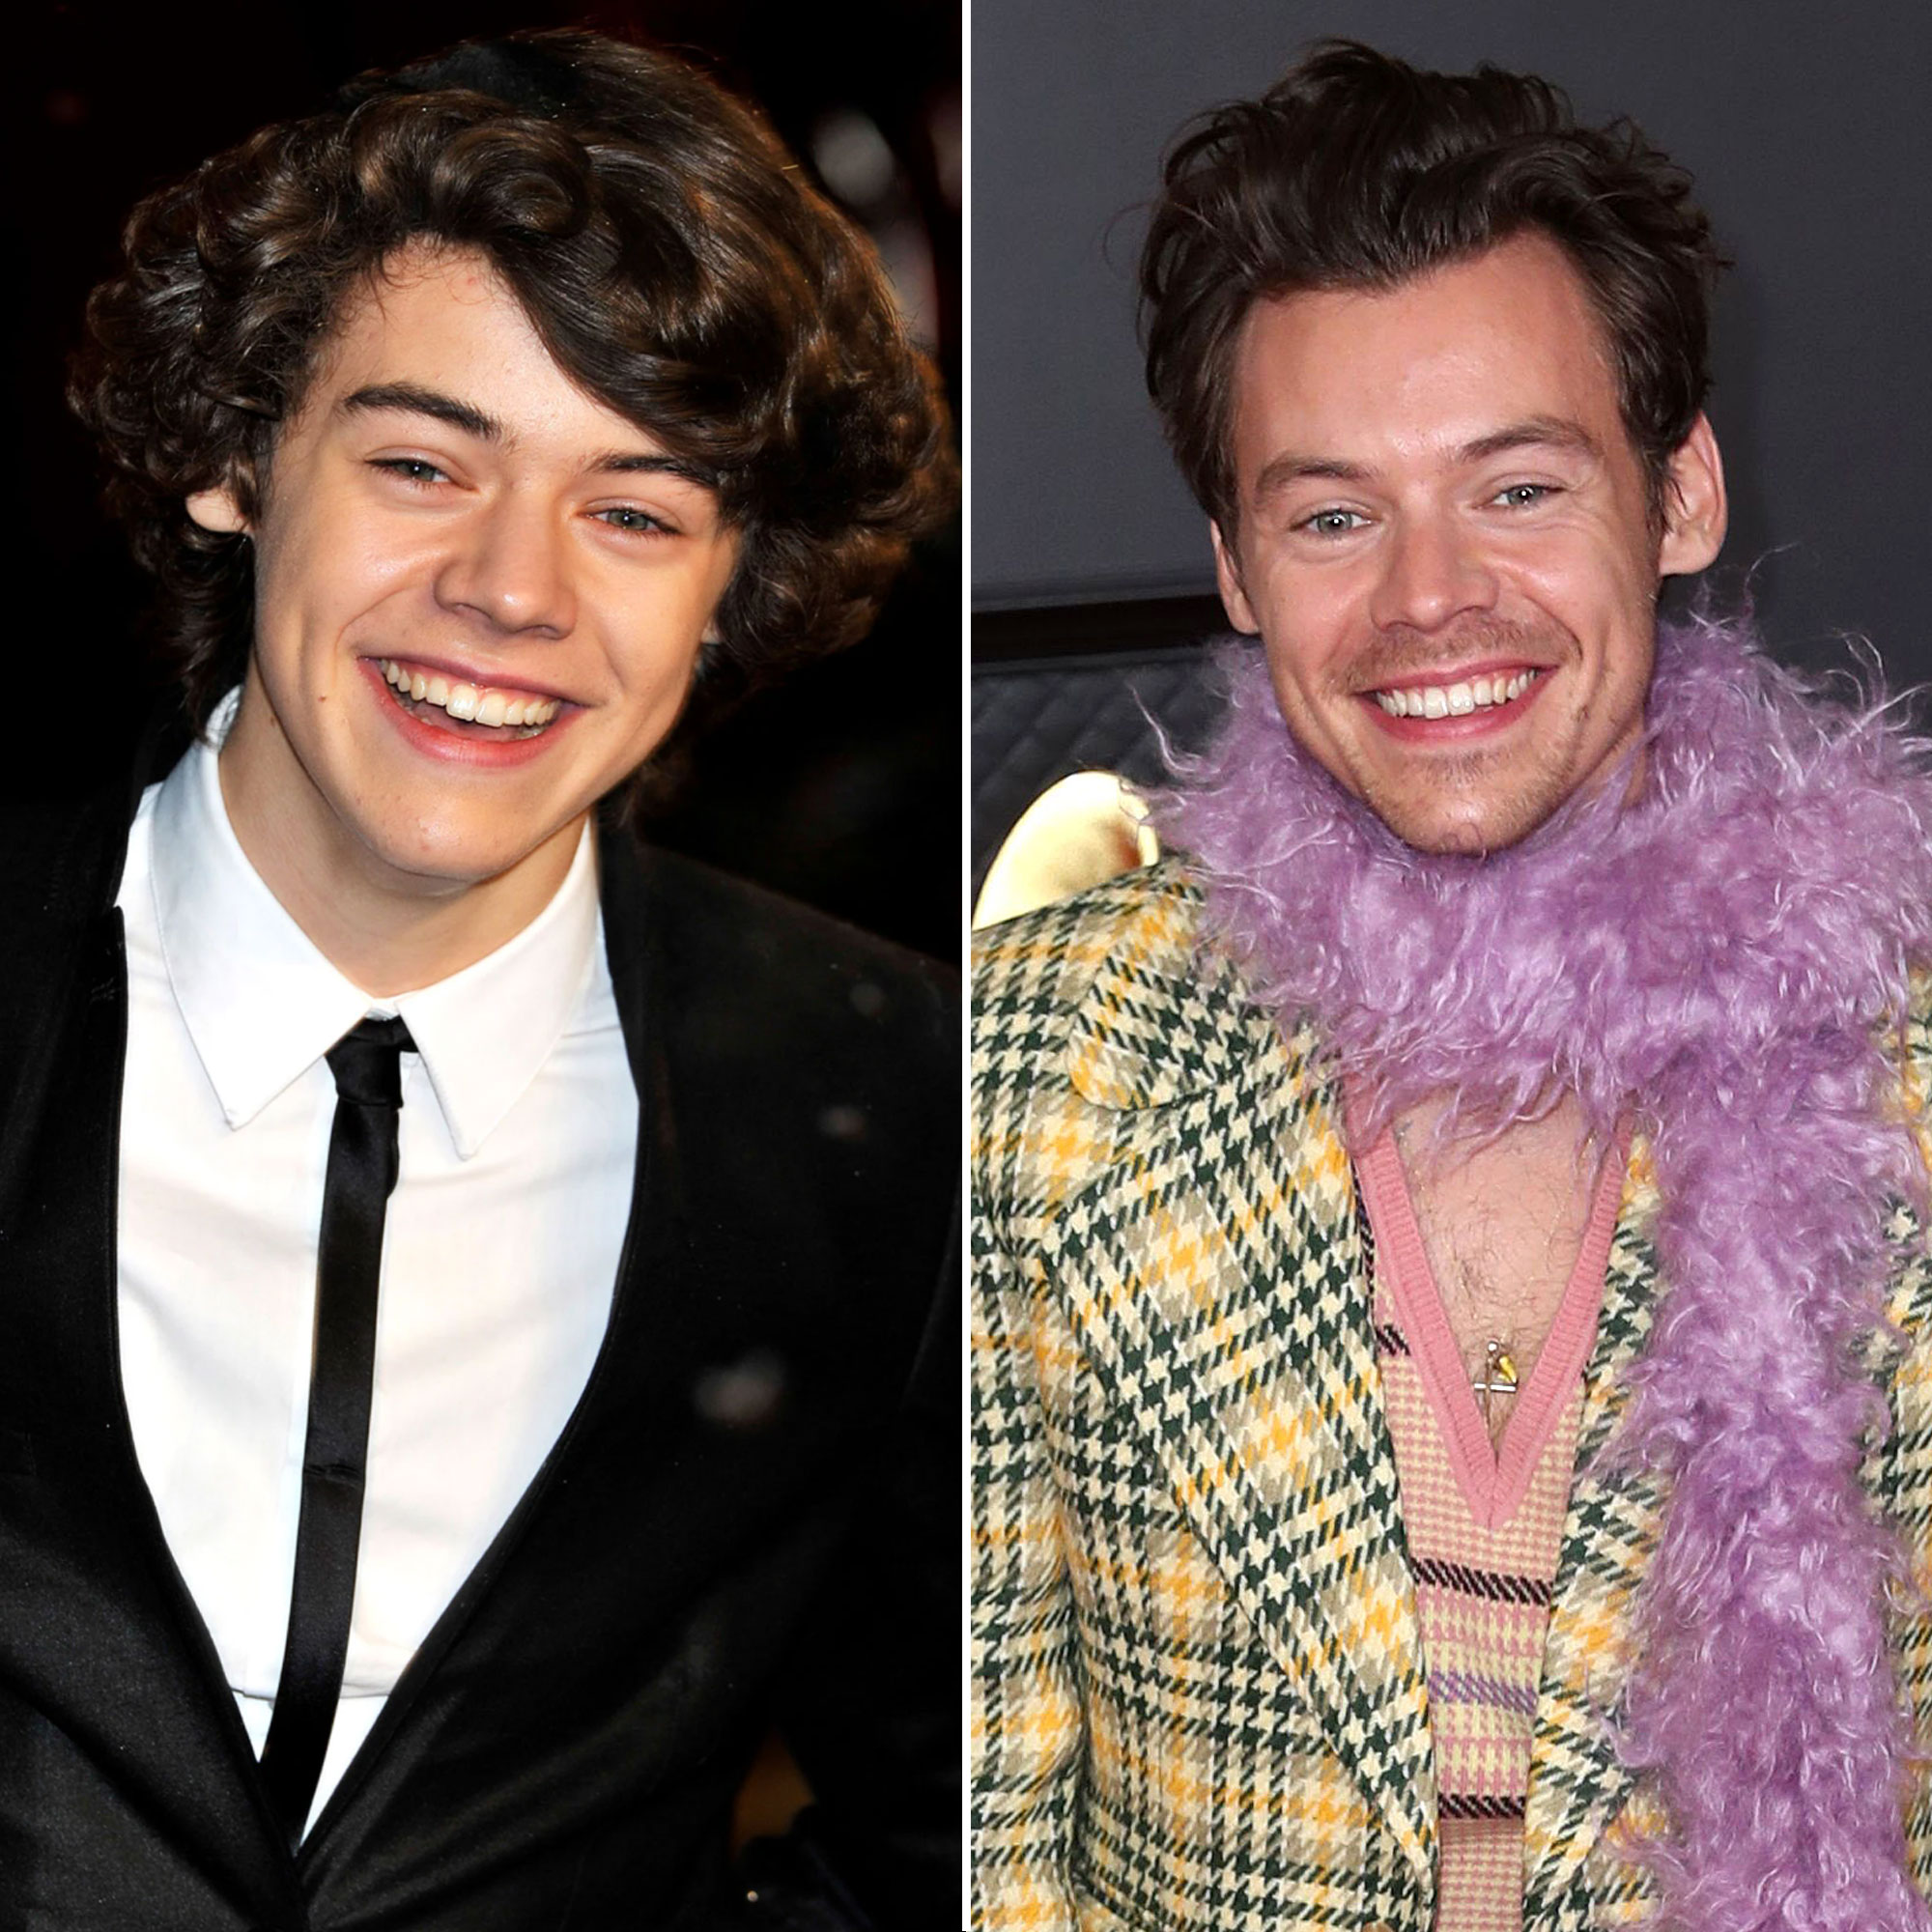 Here's What One Direction Would Look Like Without Harry Styles